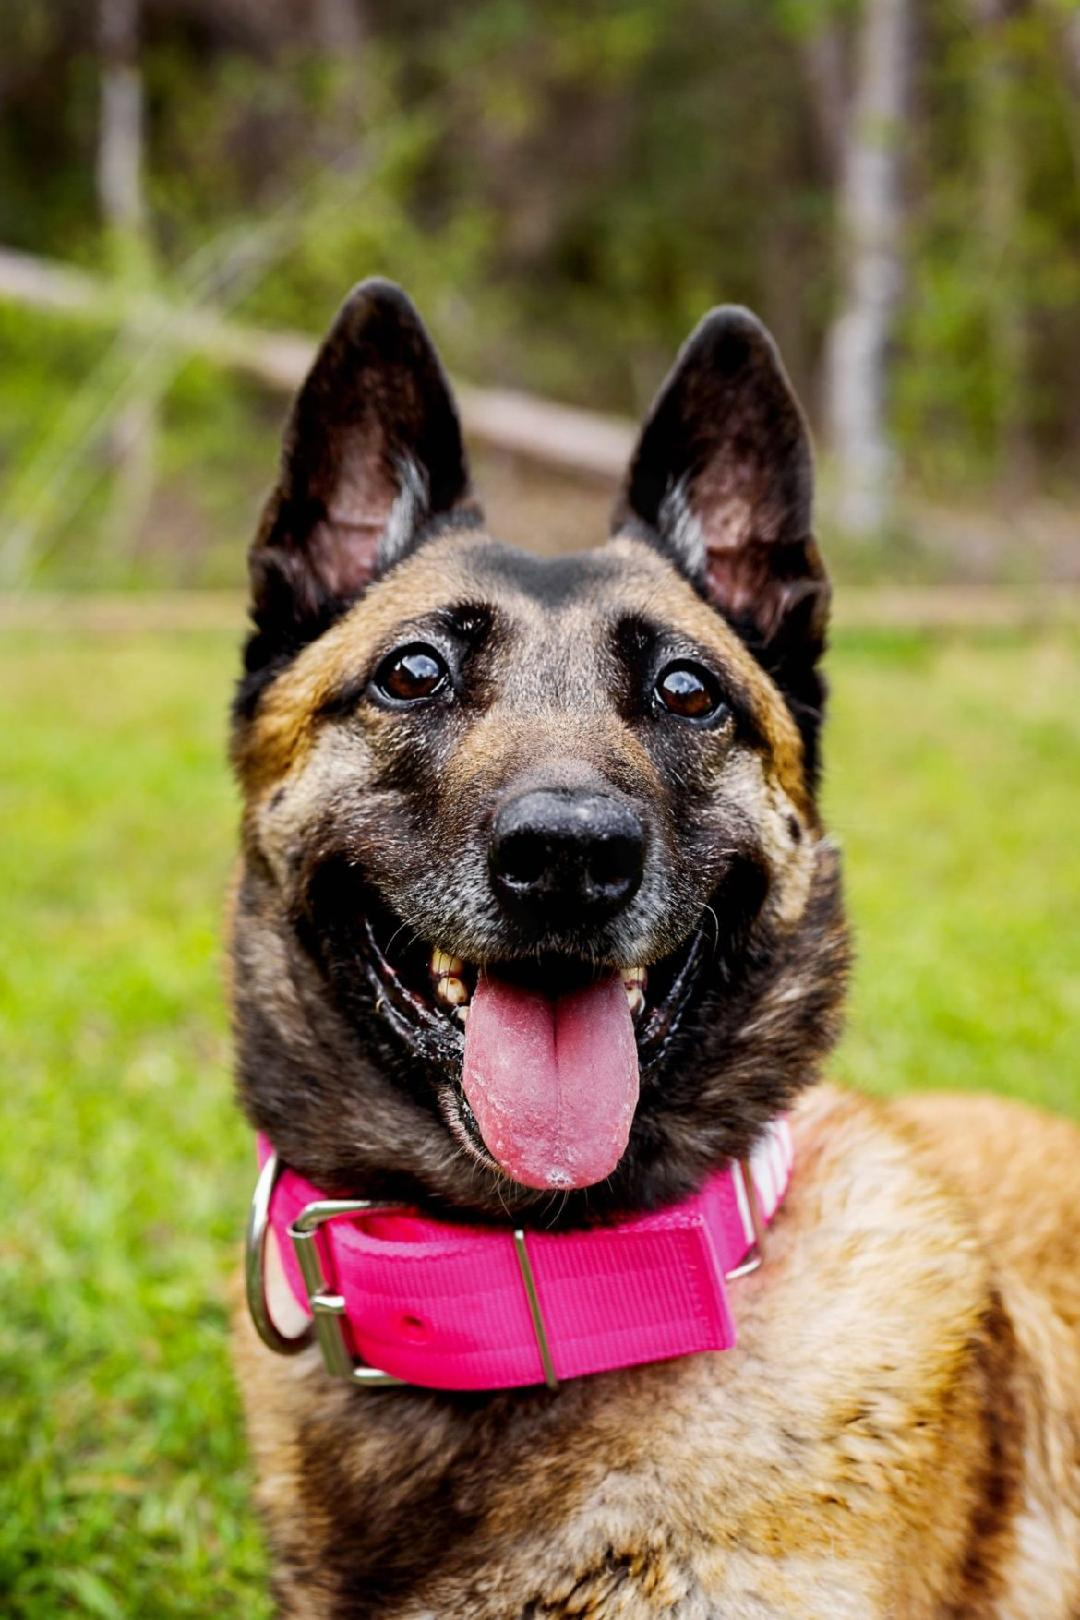 Layka in Her Pink Color